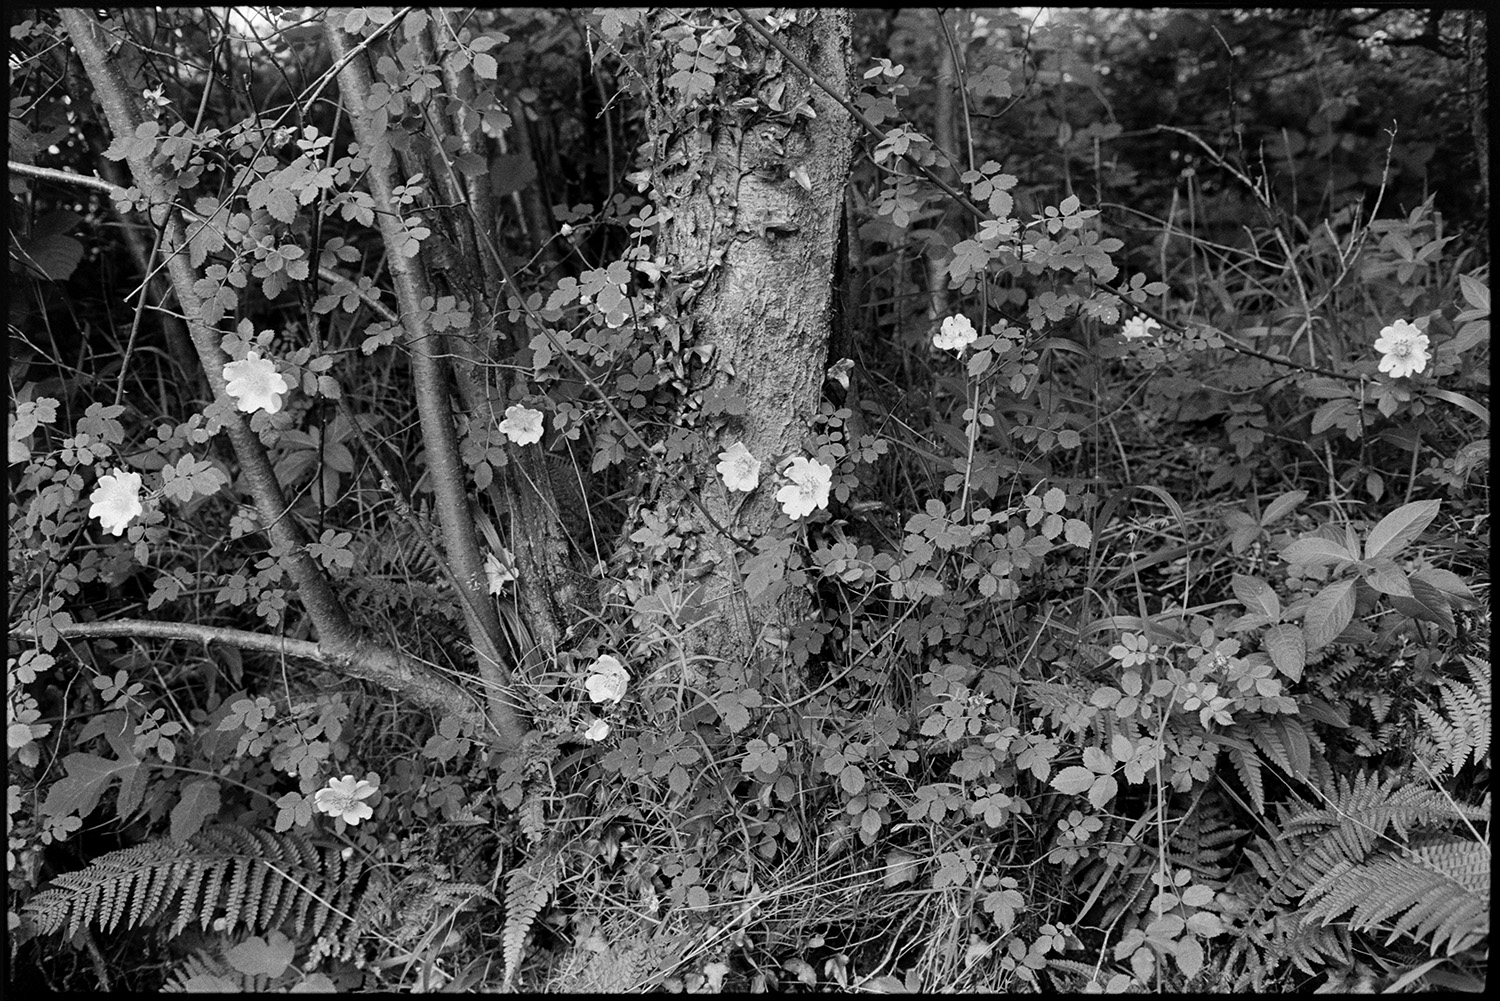 Flowers, Dog Rose in hedge. 
[Dog Rose flowers in a hedge with ferns and a tree.]